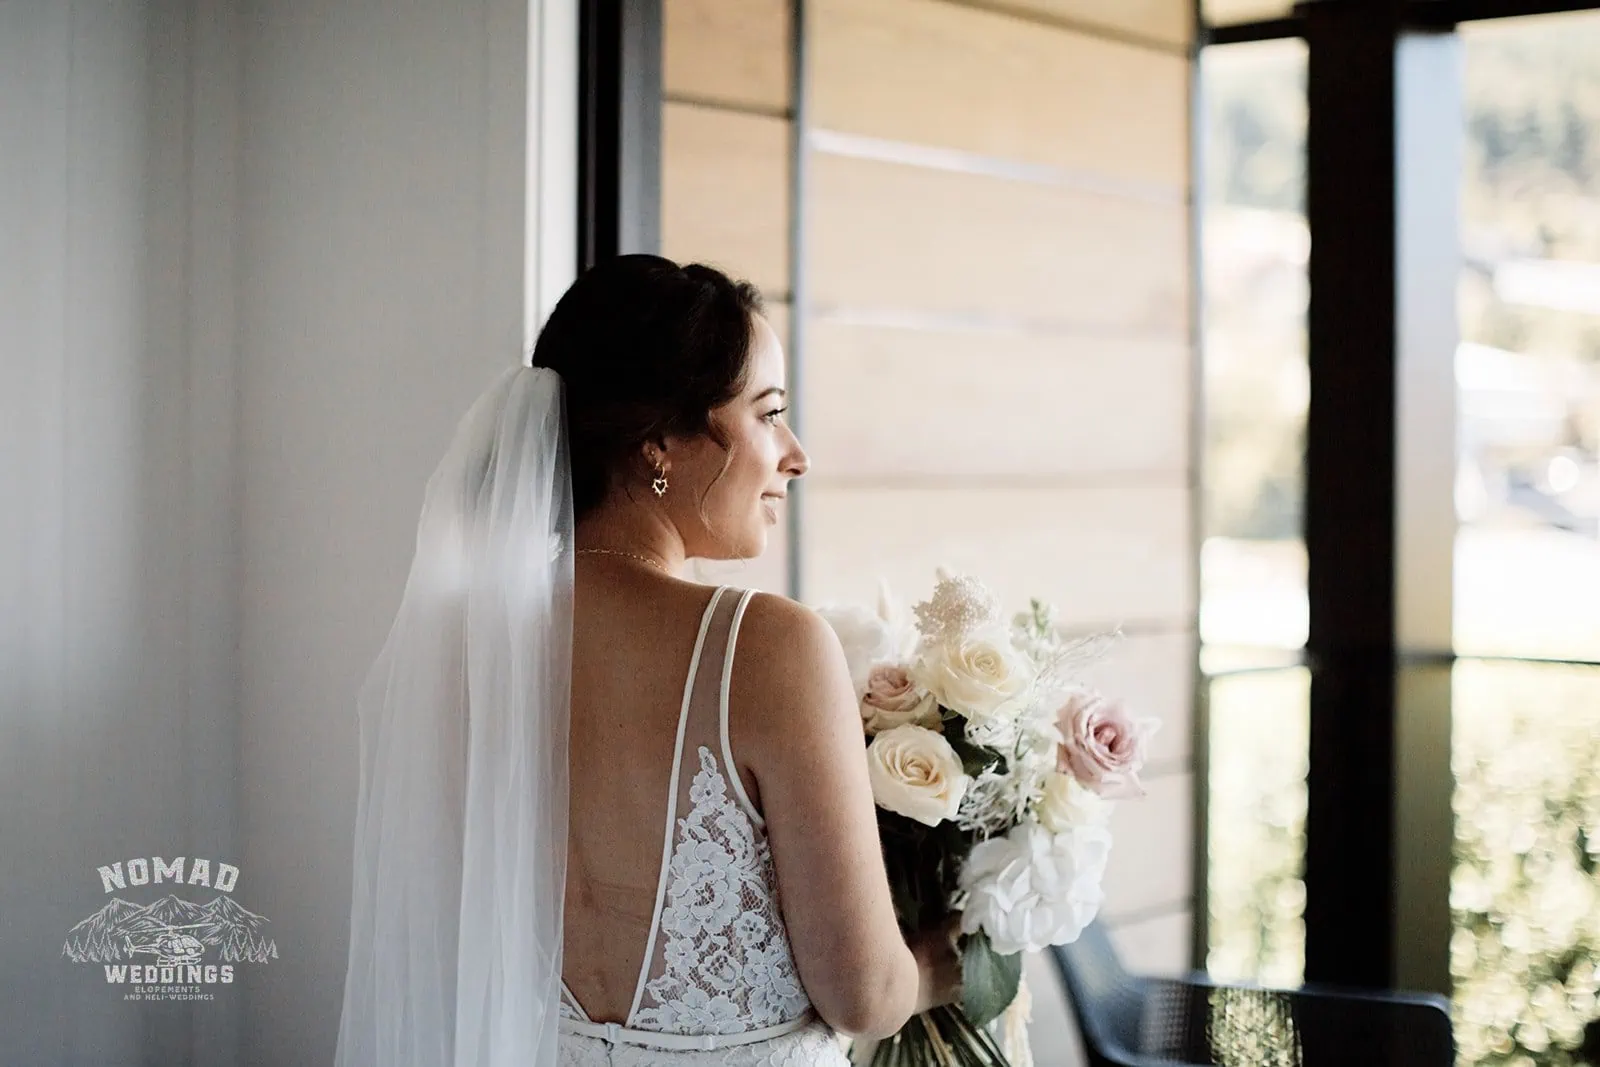 Amy looking out of window with her bouquet at Enchanting Lake Erskine Heli Elopement Wedding.